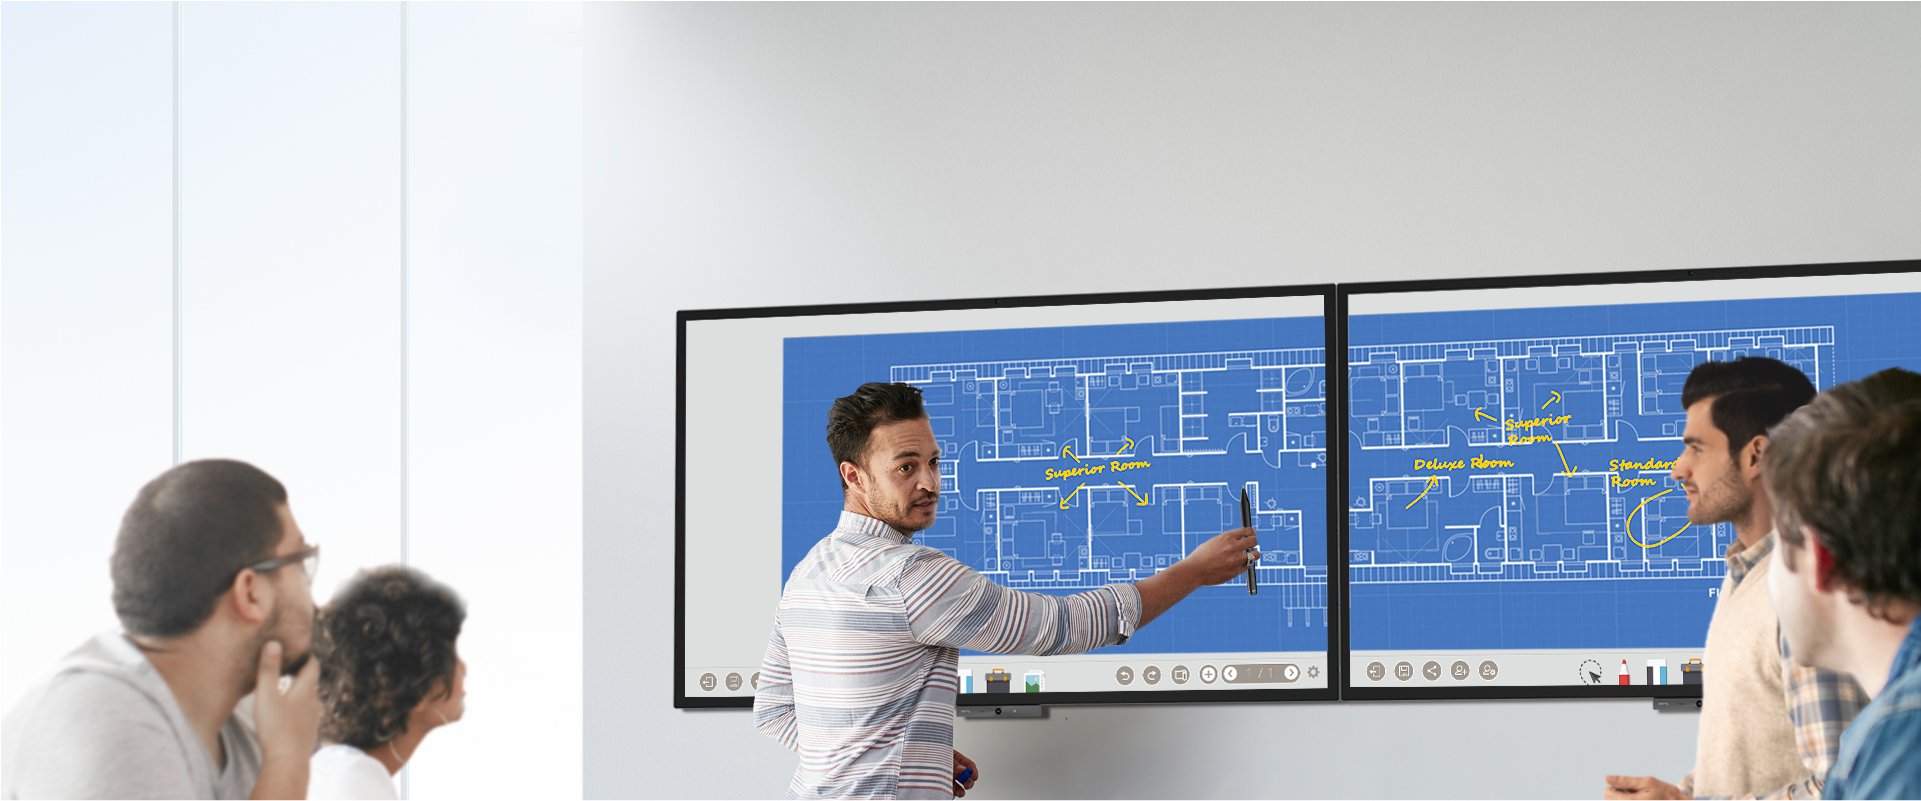 Visually communicate with collaboration tools provided by BenQ interactive displays 